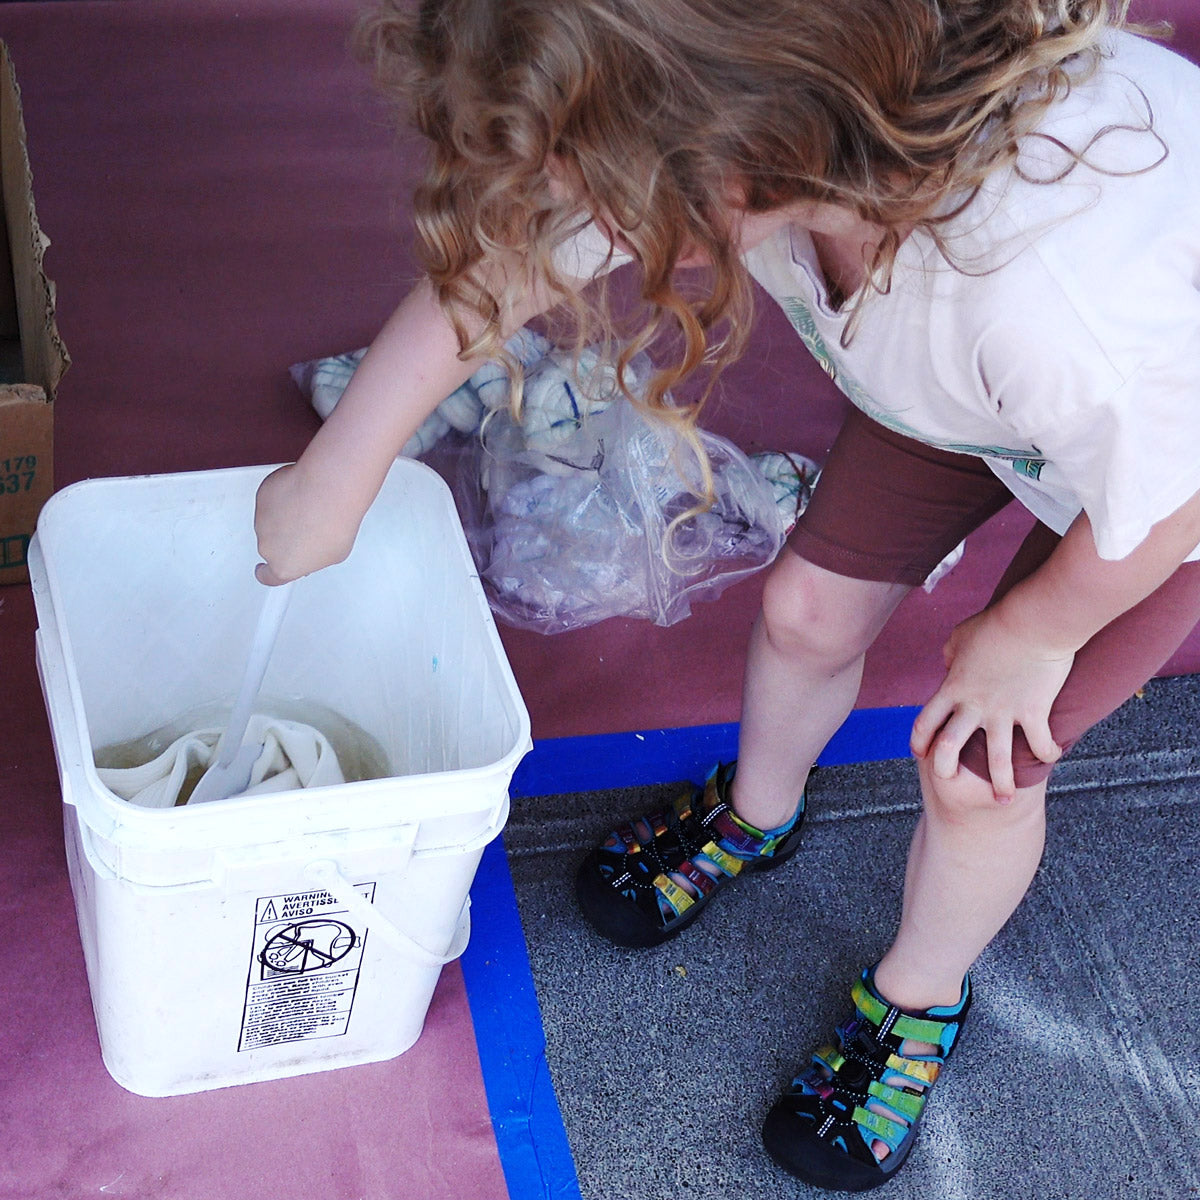 A child stirs socks soaking in the soda ash bucket to prepare them for tie-dye.